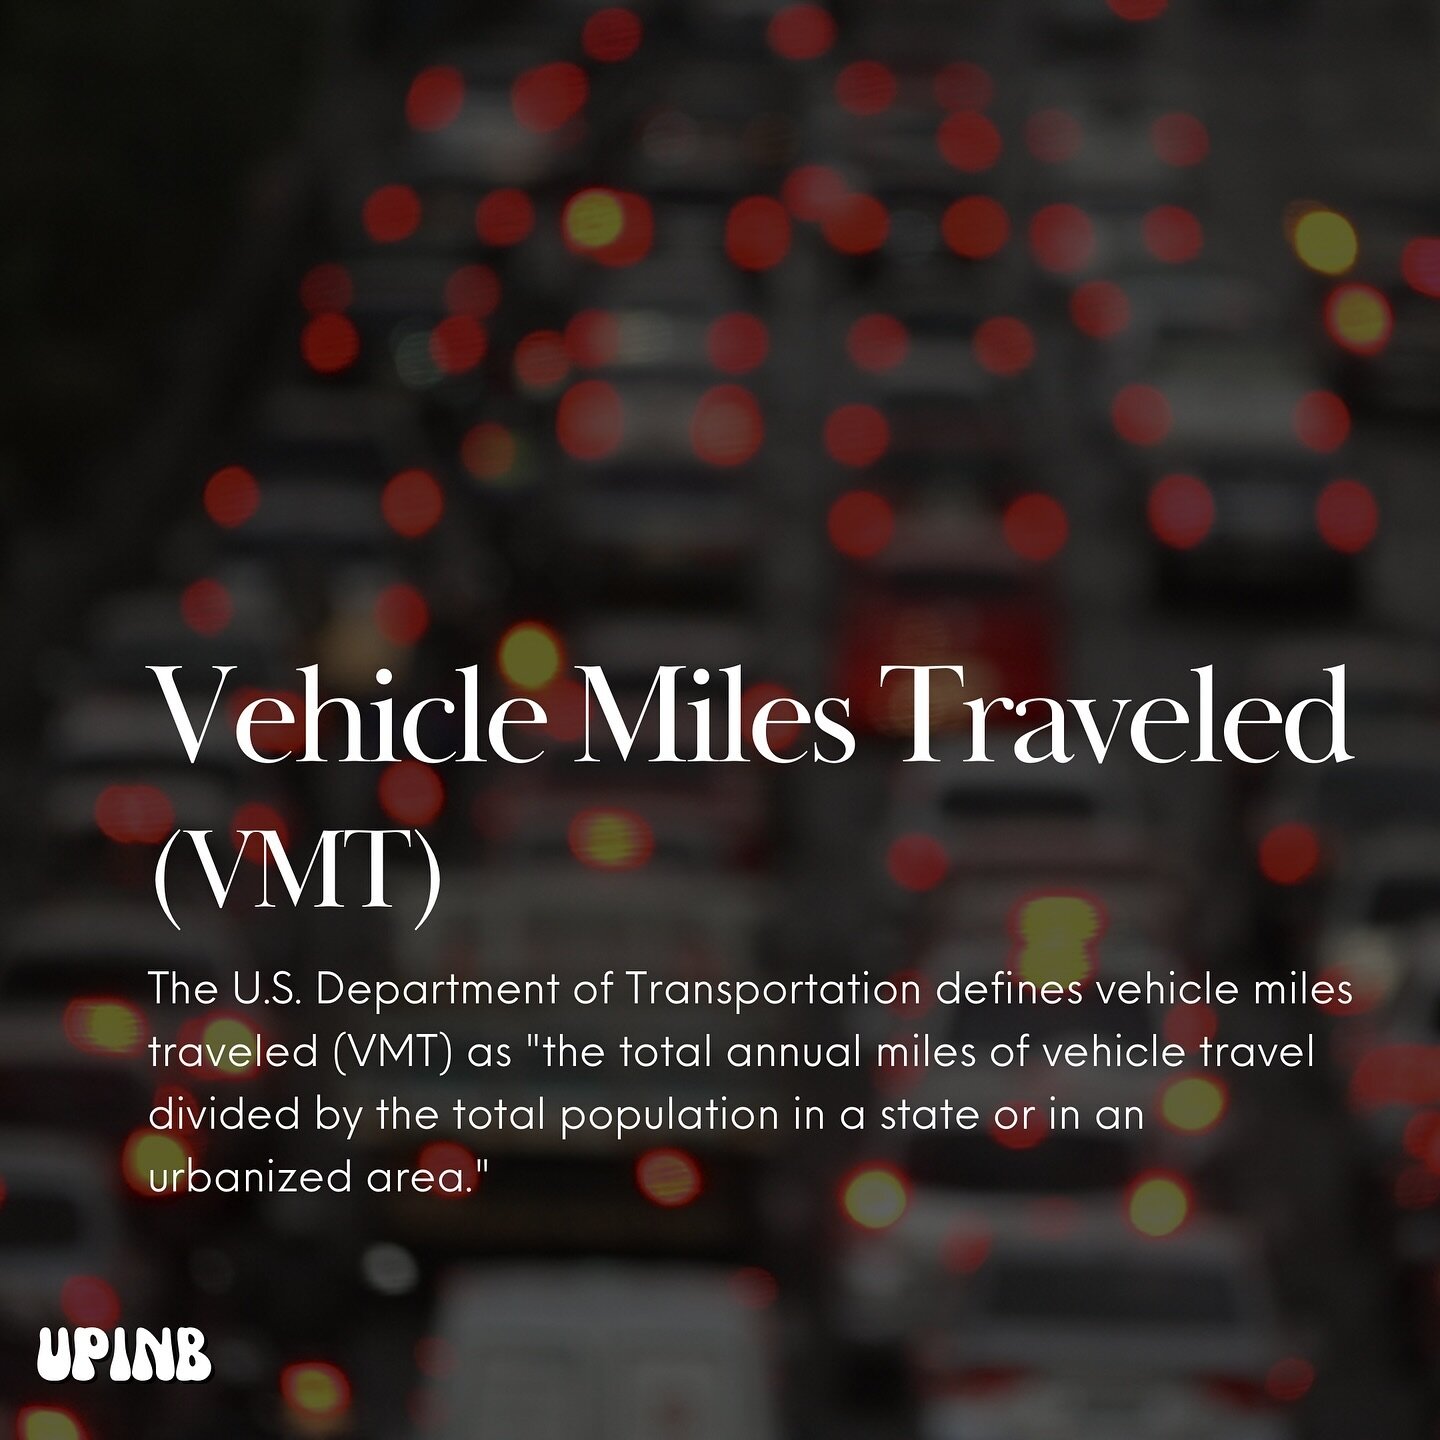 Have you listened to our most recent episode about vehicle miles traveled (VMT)?? If not, check it out to learn all about what VMT is, why it matters, and how VMT is integrated into California&rsquo;s environmental review process!